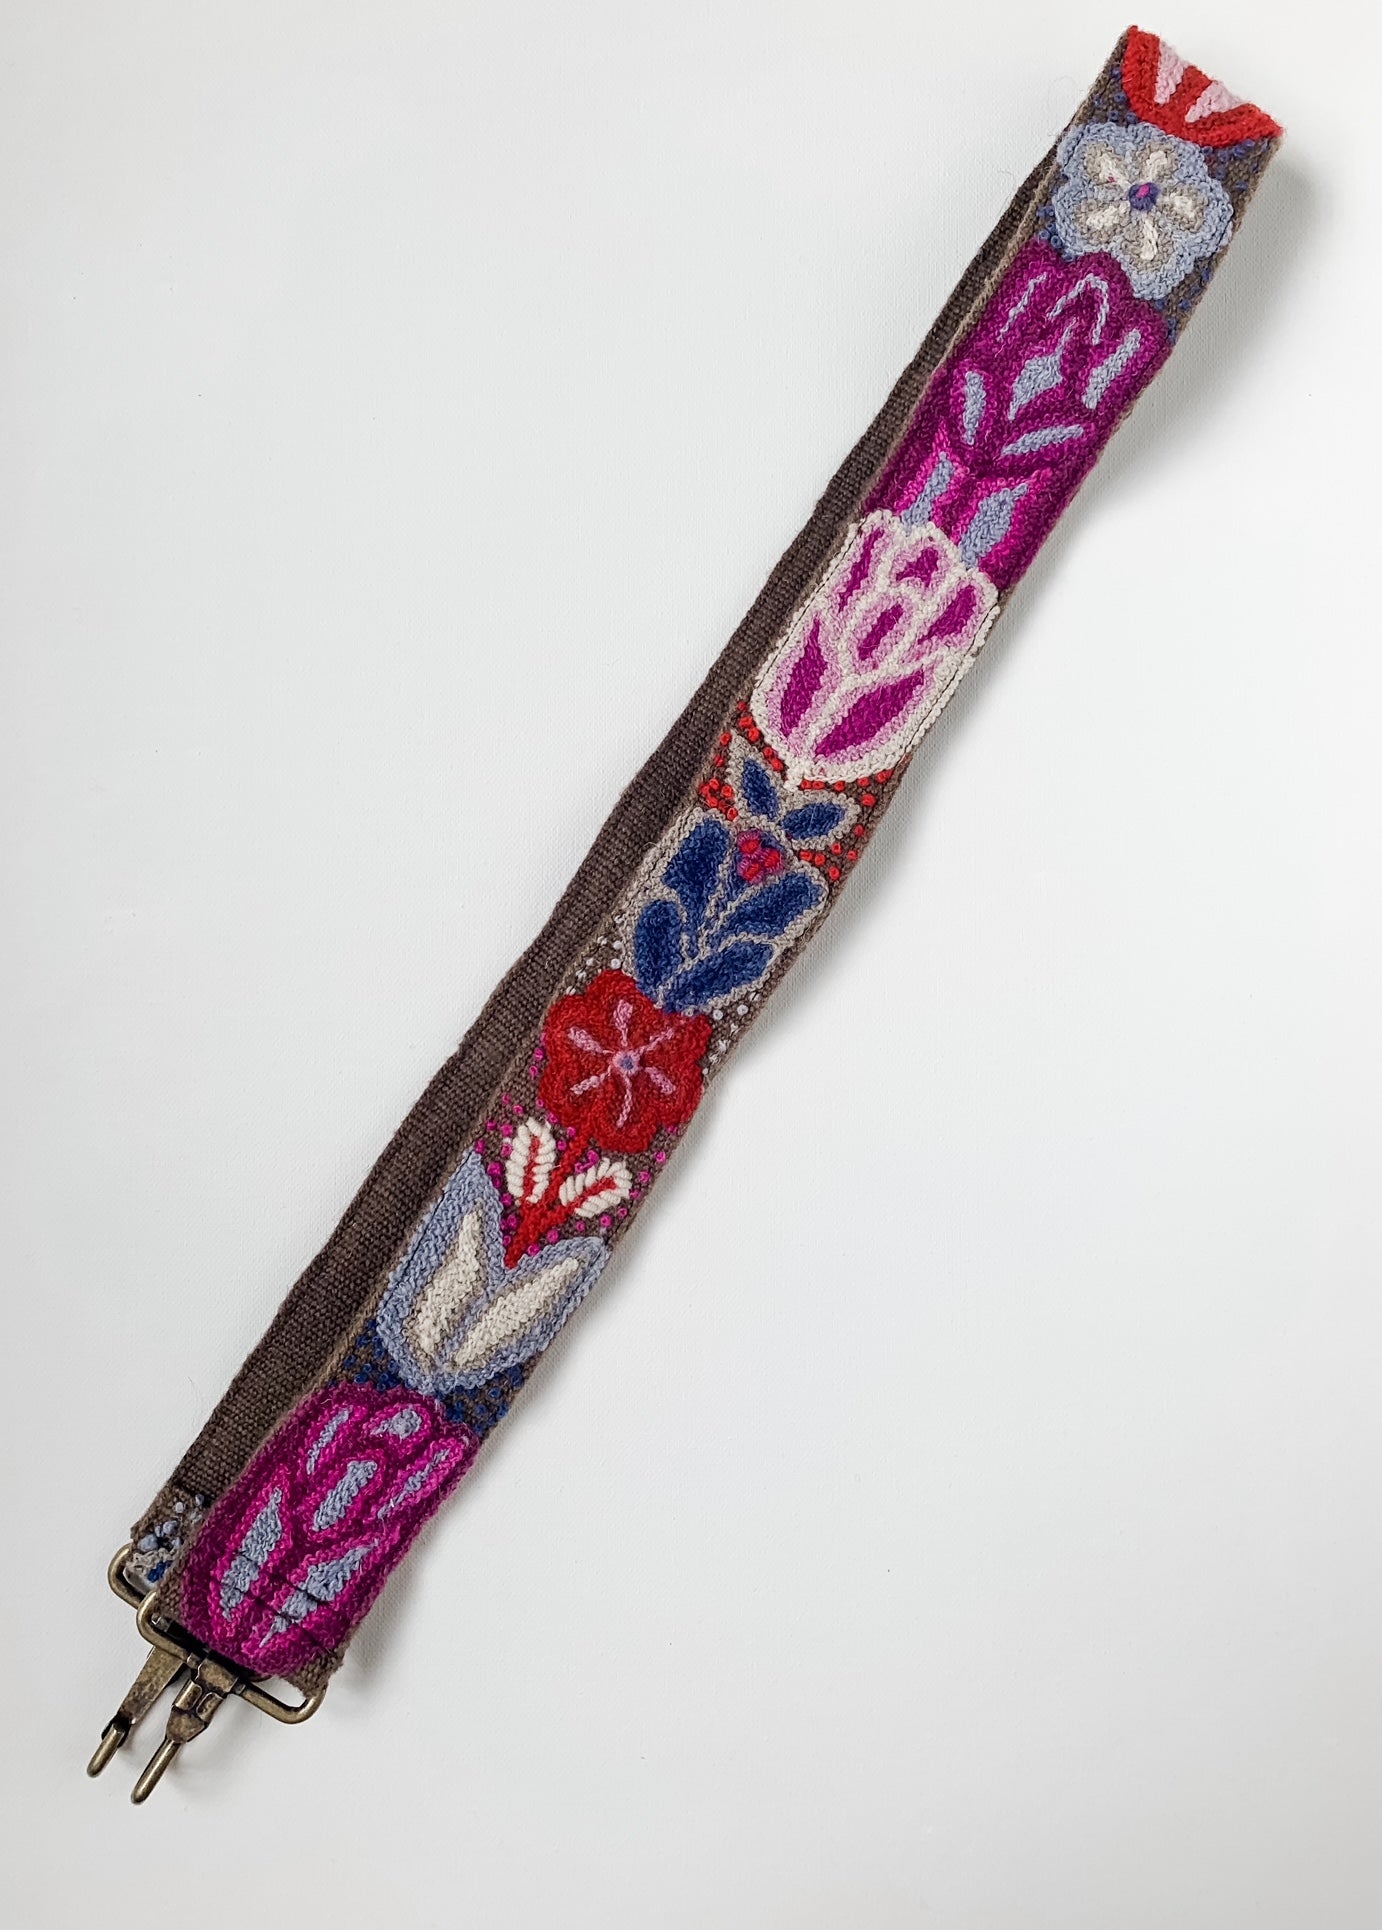 A  wool fabric purse strap with red and purple floral accents